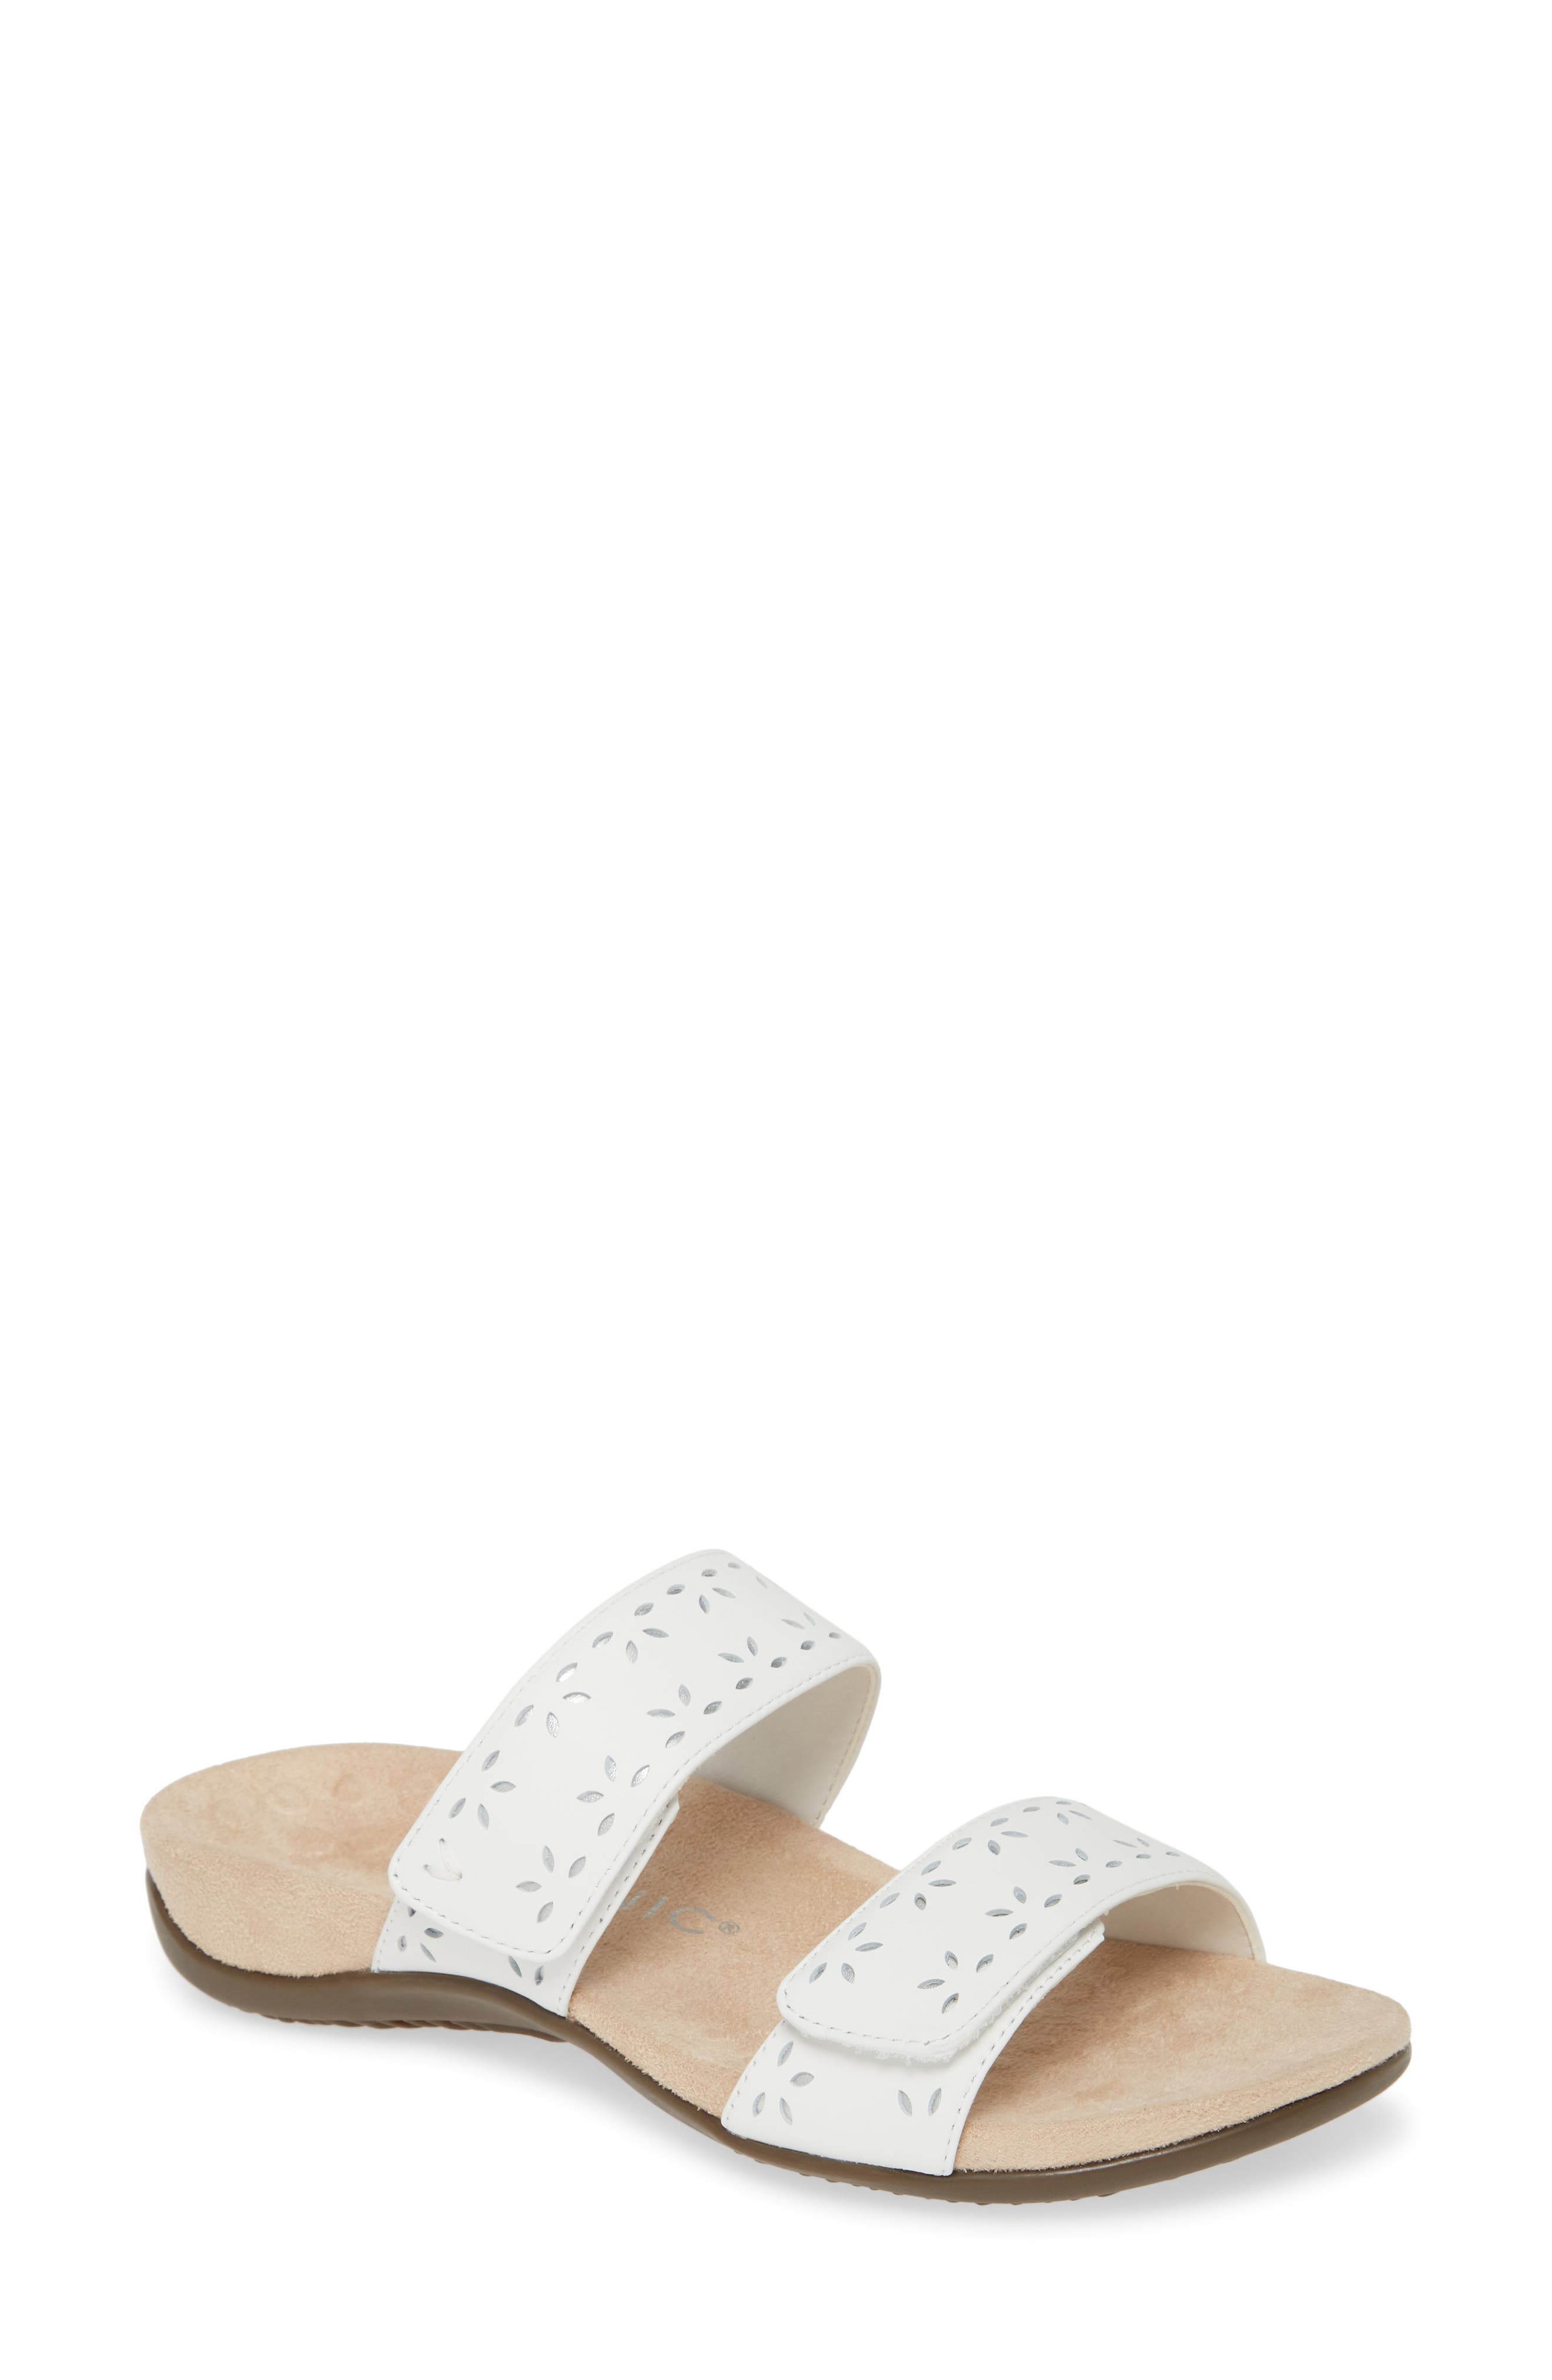 vionic womens shoes nordstrom